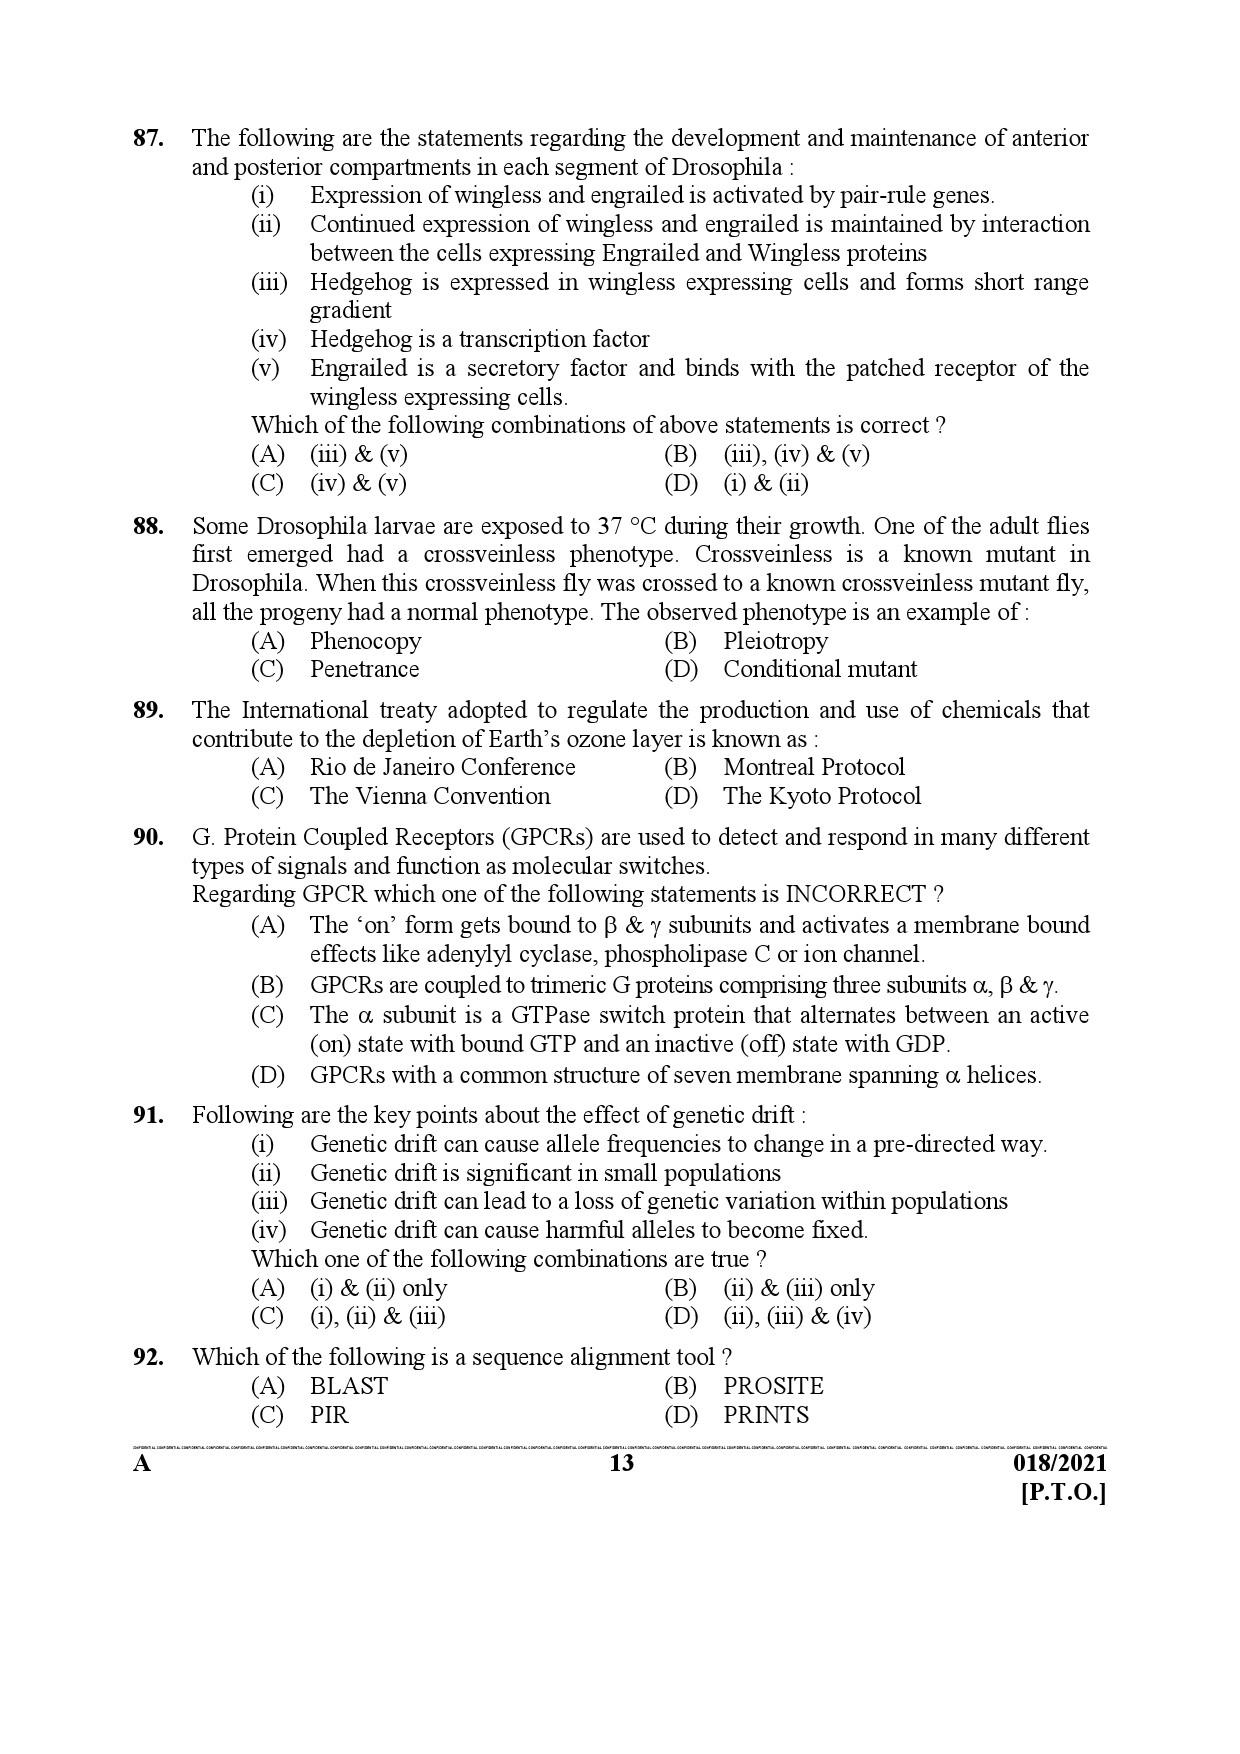 Kerala PSC Scientific Officer Biology Examination Question Paper of